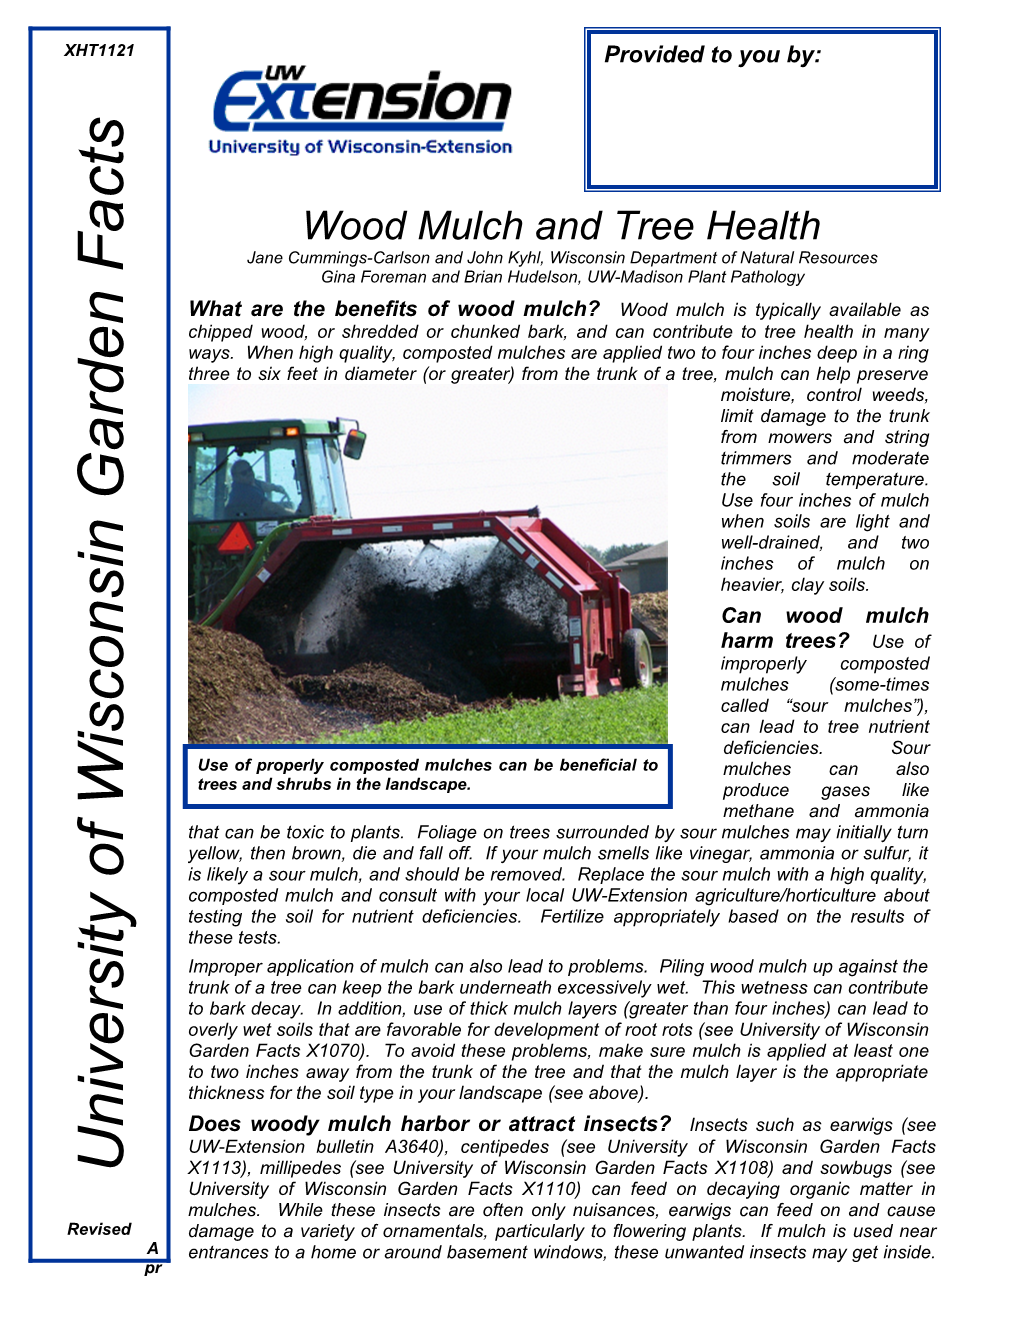 Wood Mulch and Tree Health